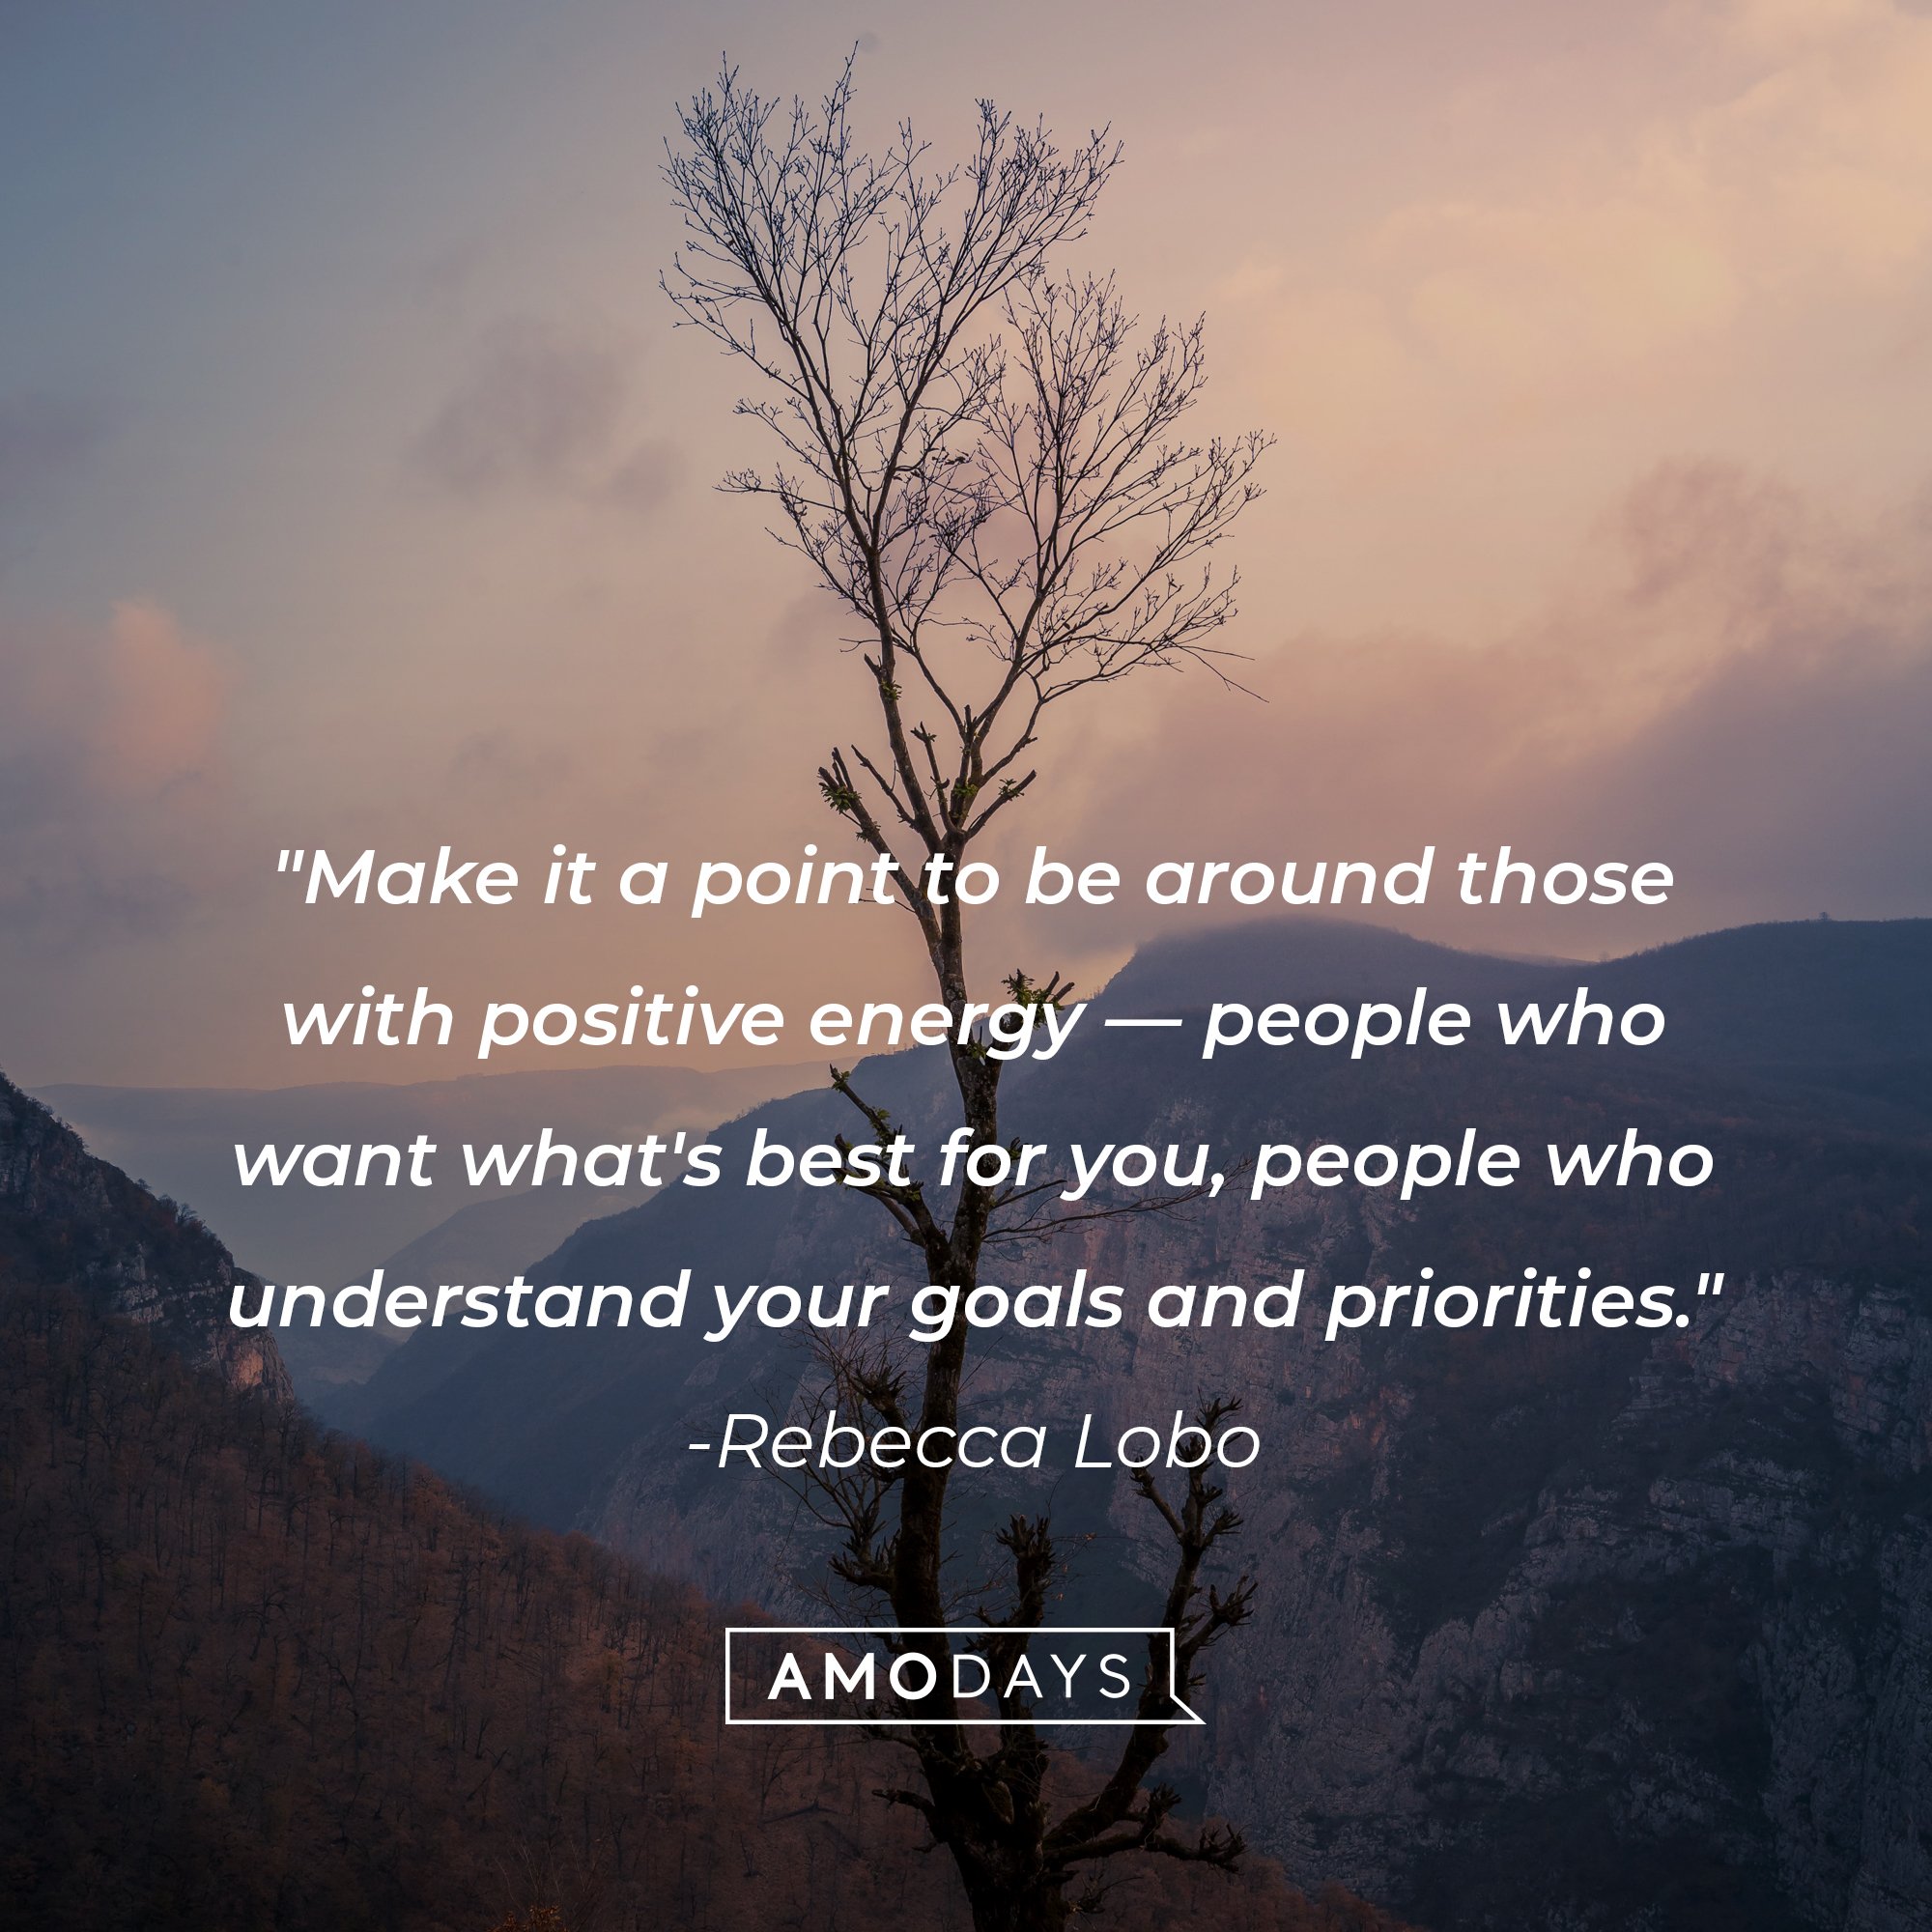 Rebecca Lobo’s quote: "Make it a point to be around those with positive energy—people who want what's best for you, people who understand your goals and priorities." | Image: AmoDays   